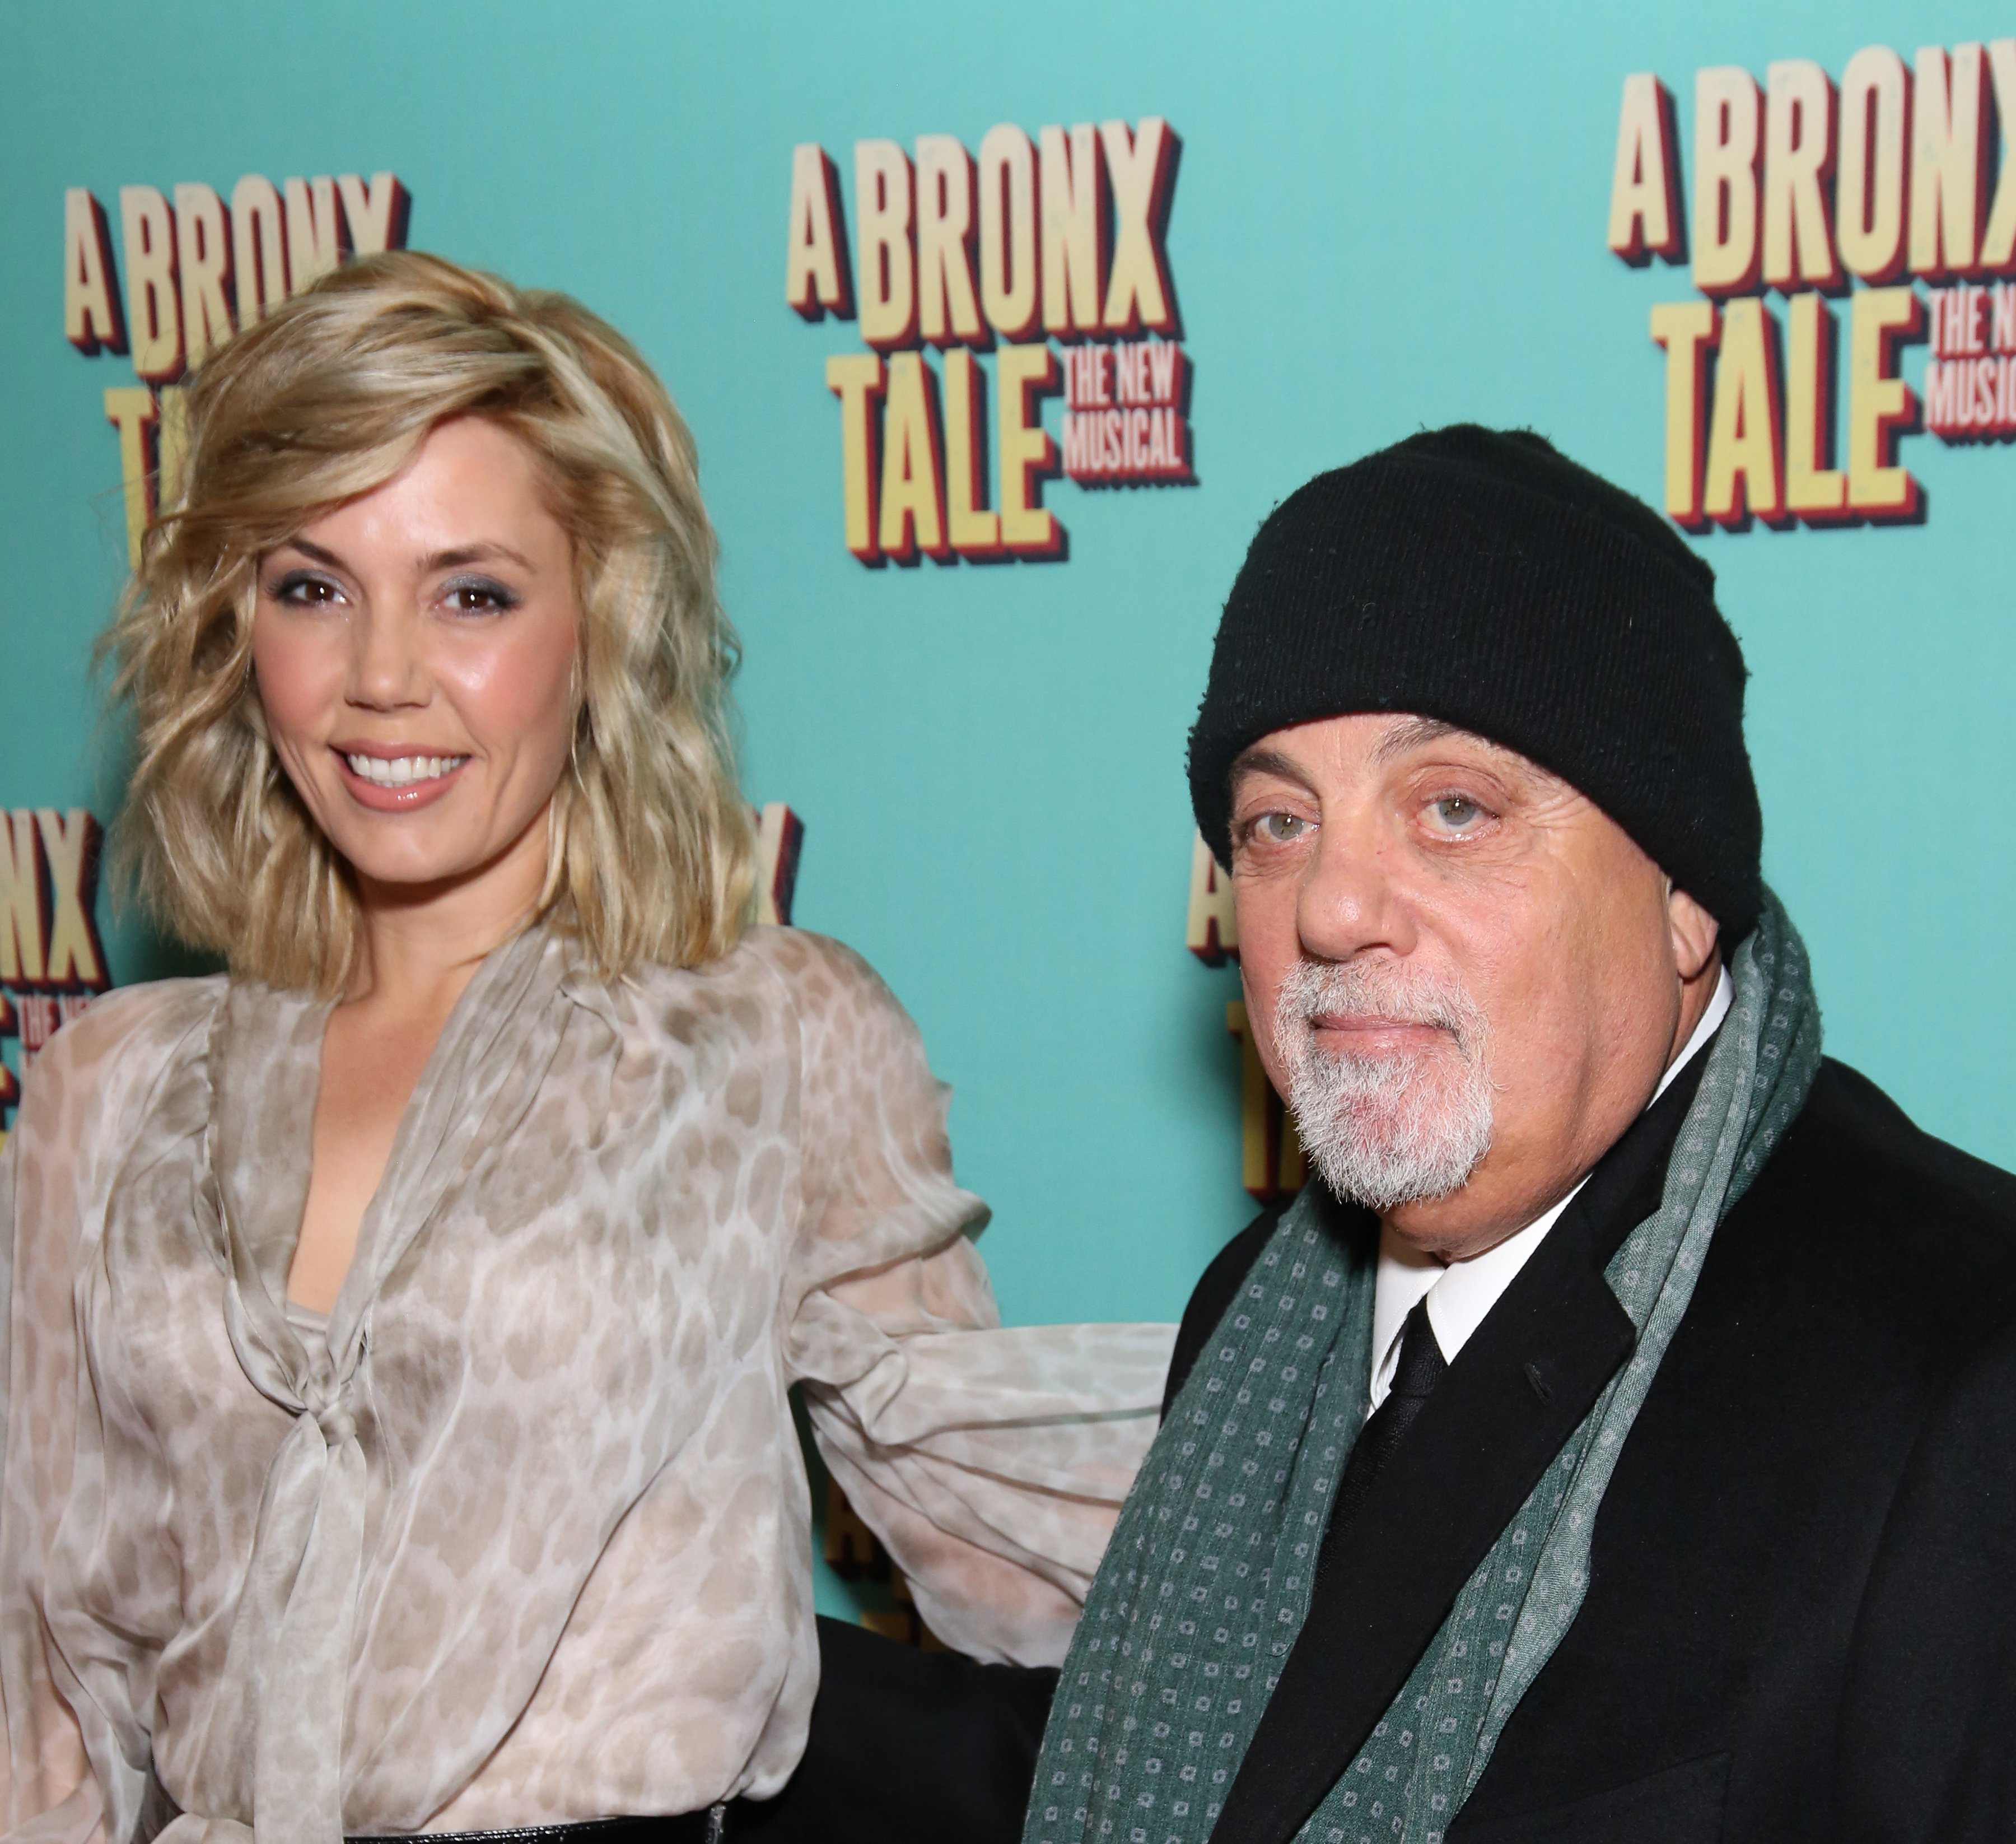 Alexis Roderick and Billy Joel during the Broadway Opening Night Performance of "A Bronx Tale" at The Longacre on December 1, 2016 in New York City. / Source: Getty Images